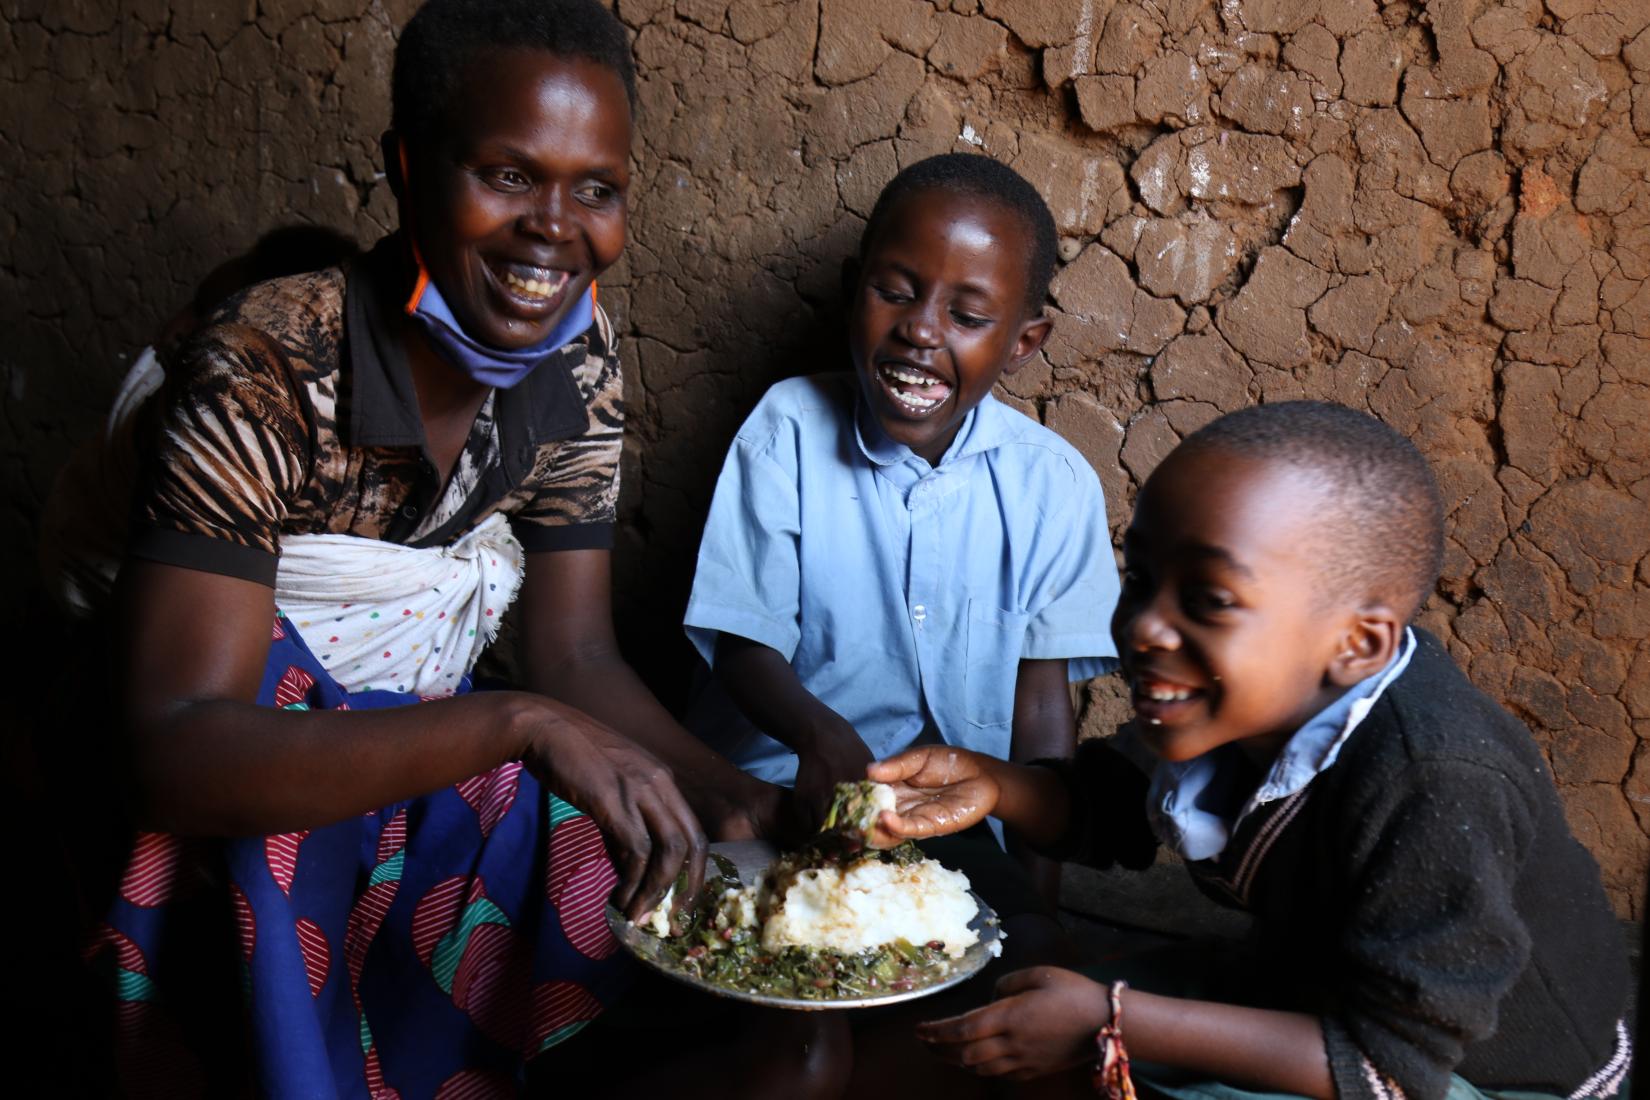 WFP provides food and nutrition assistance to all refugee camp residents across Rwanda. The most vulnerable men, women, girls and boys receive additional nutritious food to treat and prevent malnutrition.